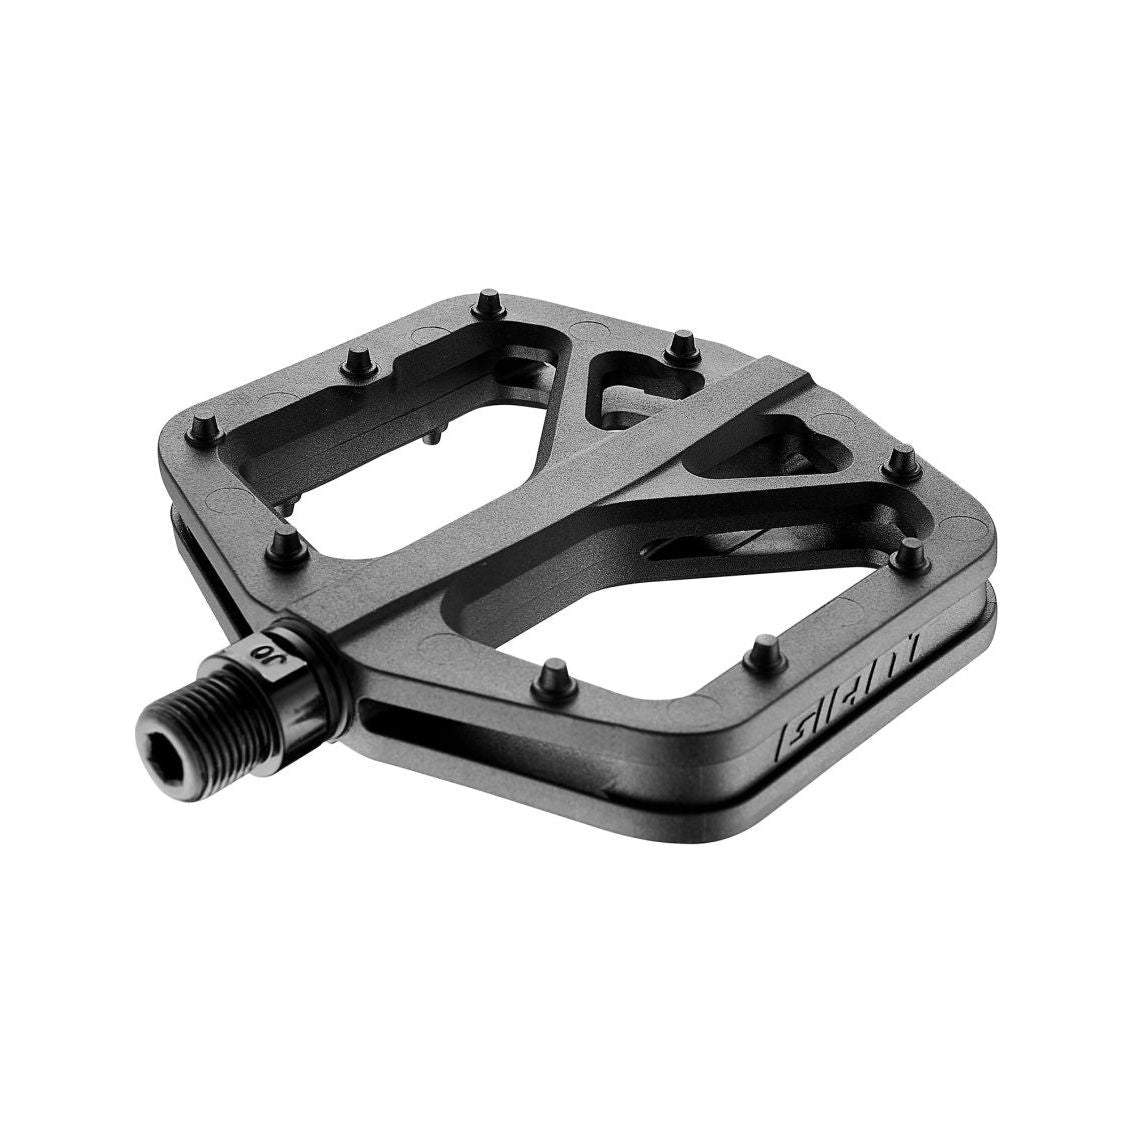 Flat Pinner Comp Giant pedals